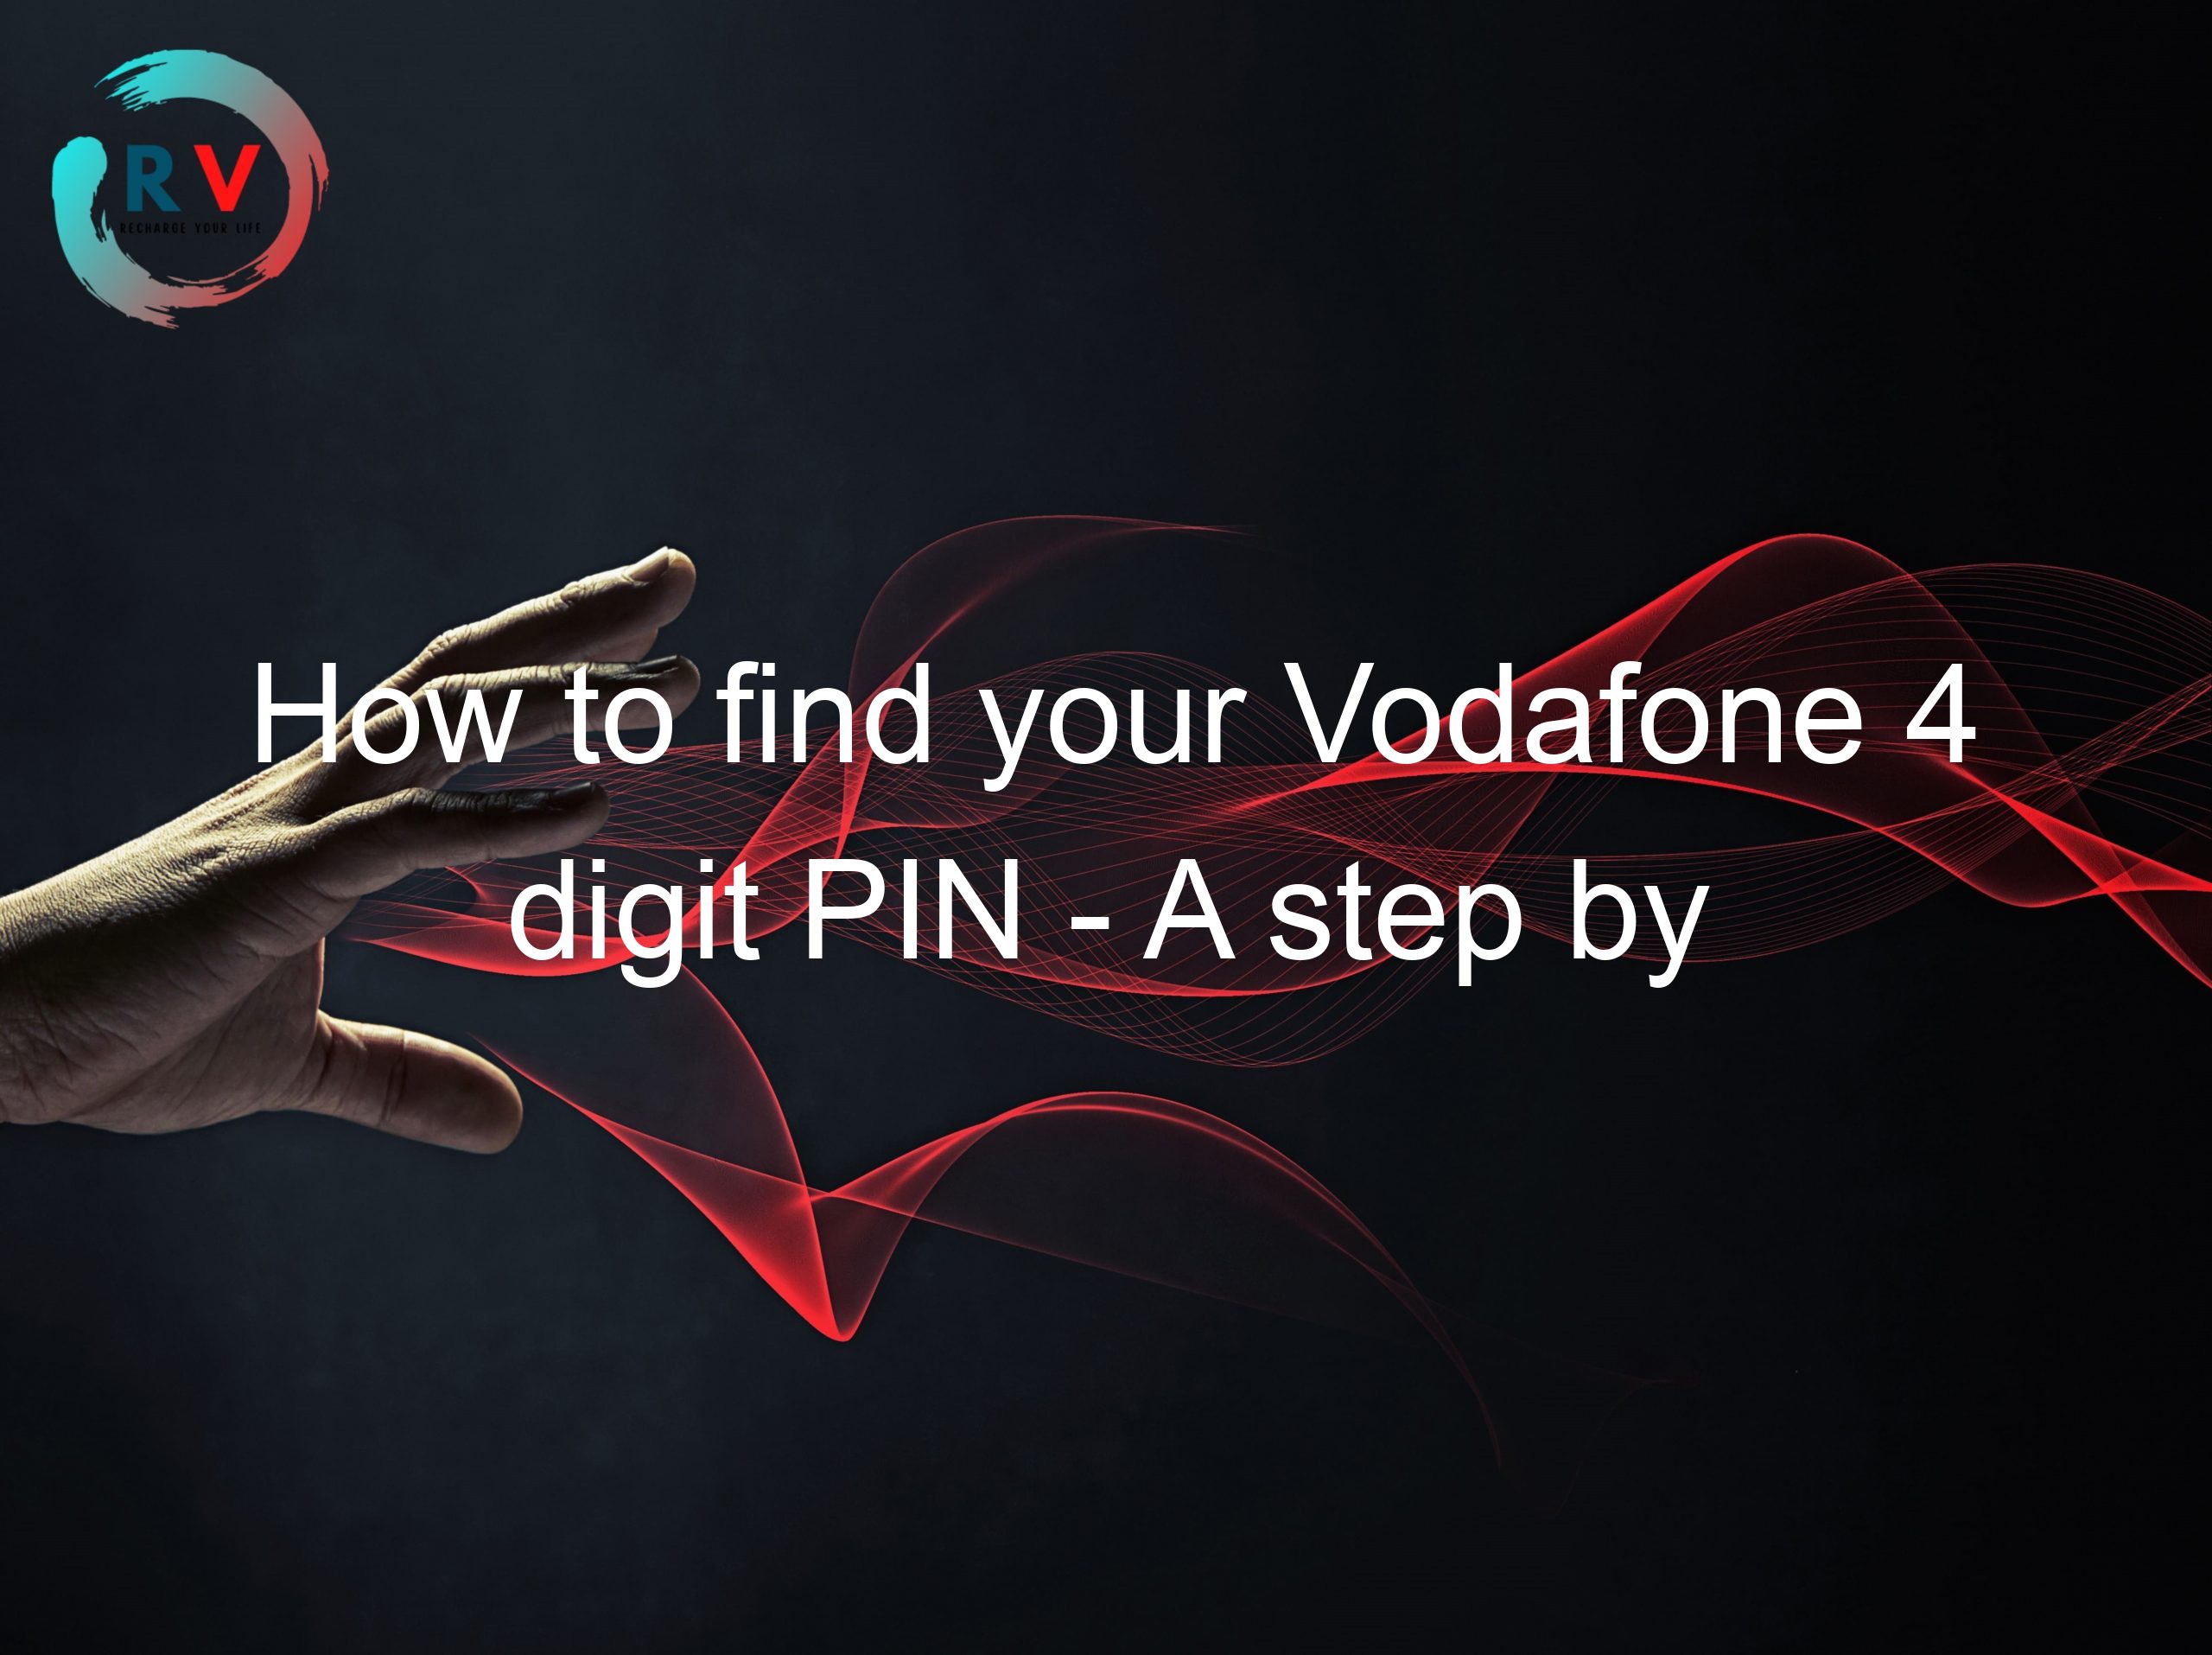 How to find your Vodafone 4 digit PIN - A step by step guide